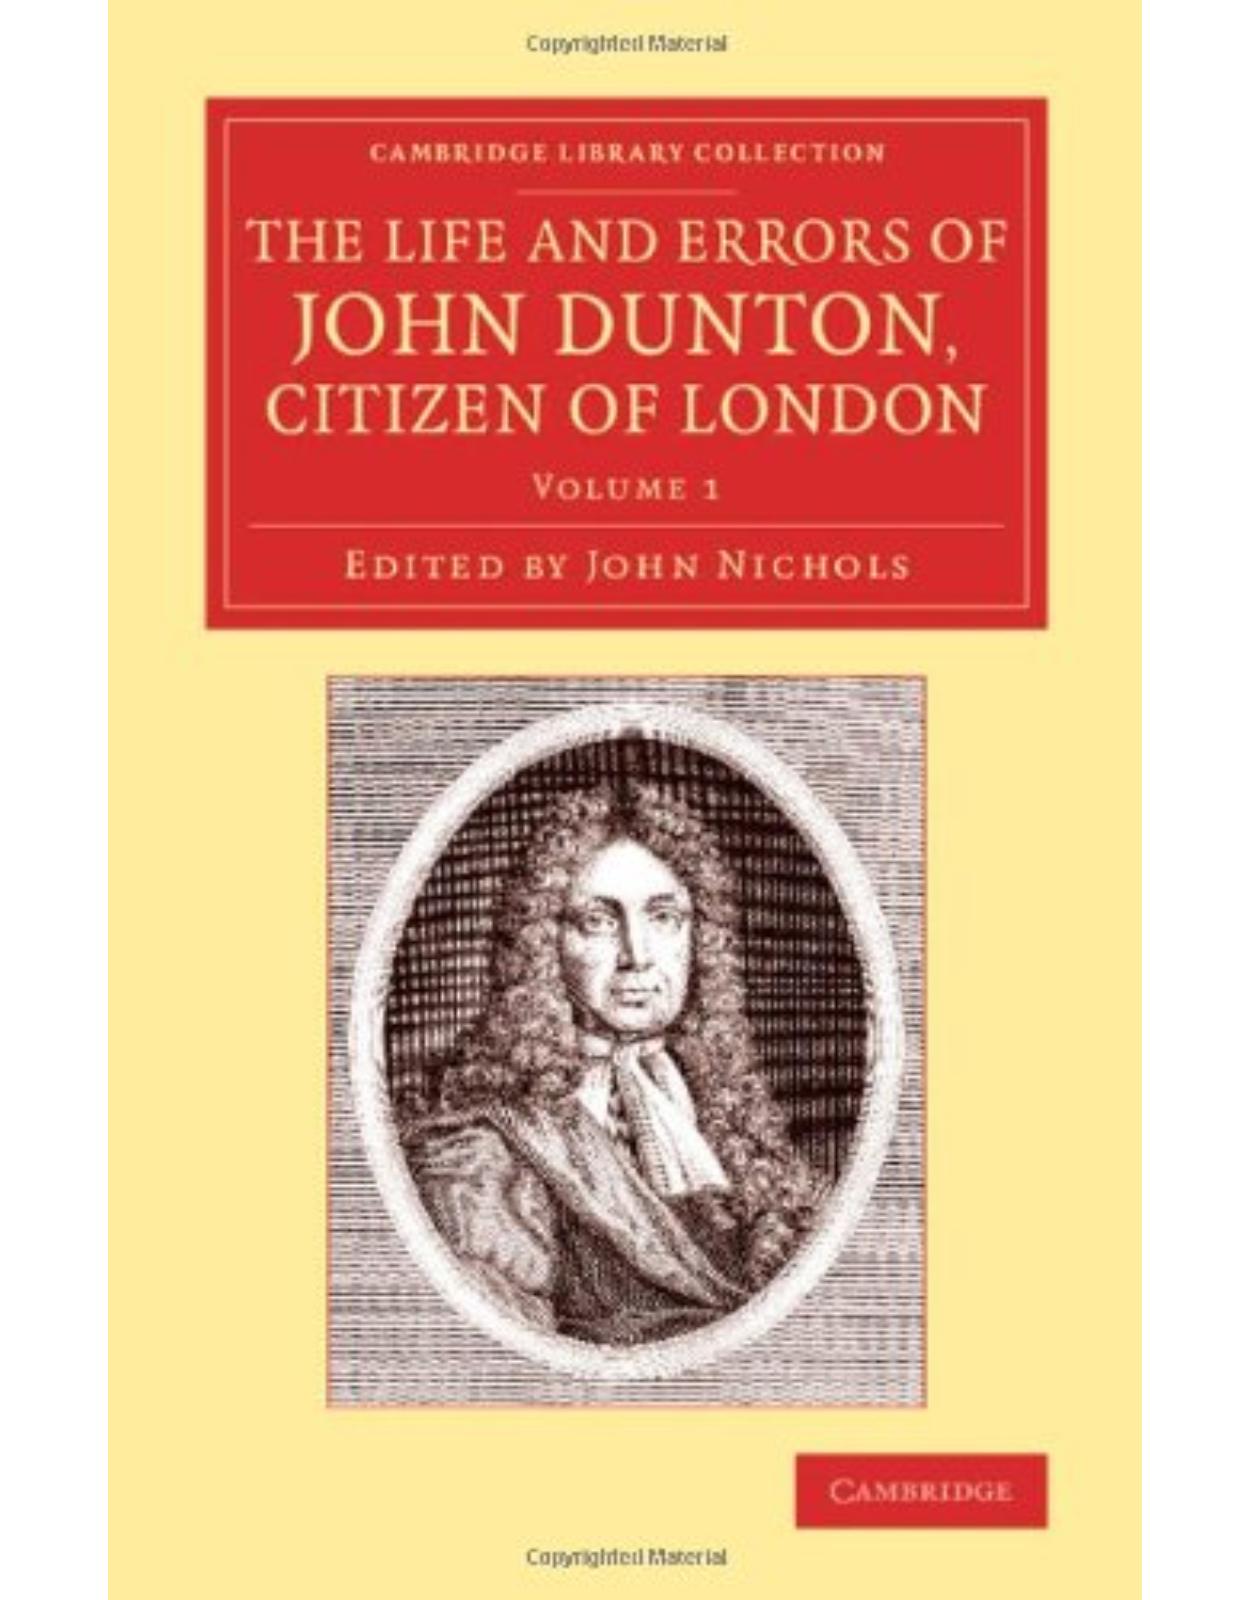 The Life and Errors of John Dunton, Citizen of London 2 Volume Set: The Life and Errors of John Dunton, Citizen of London: With the Lives and ... of Printing, Publishing and Libraries)